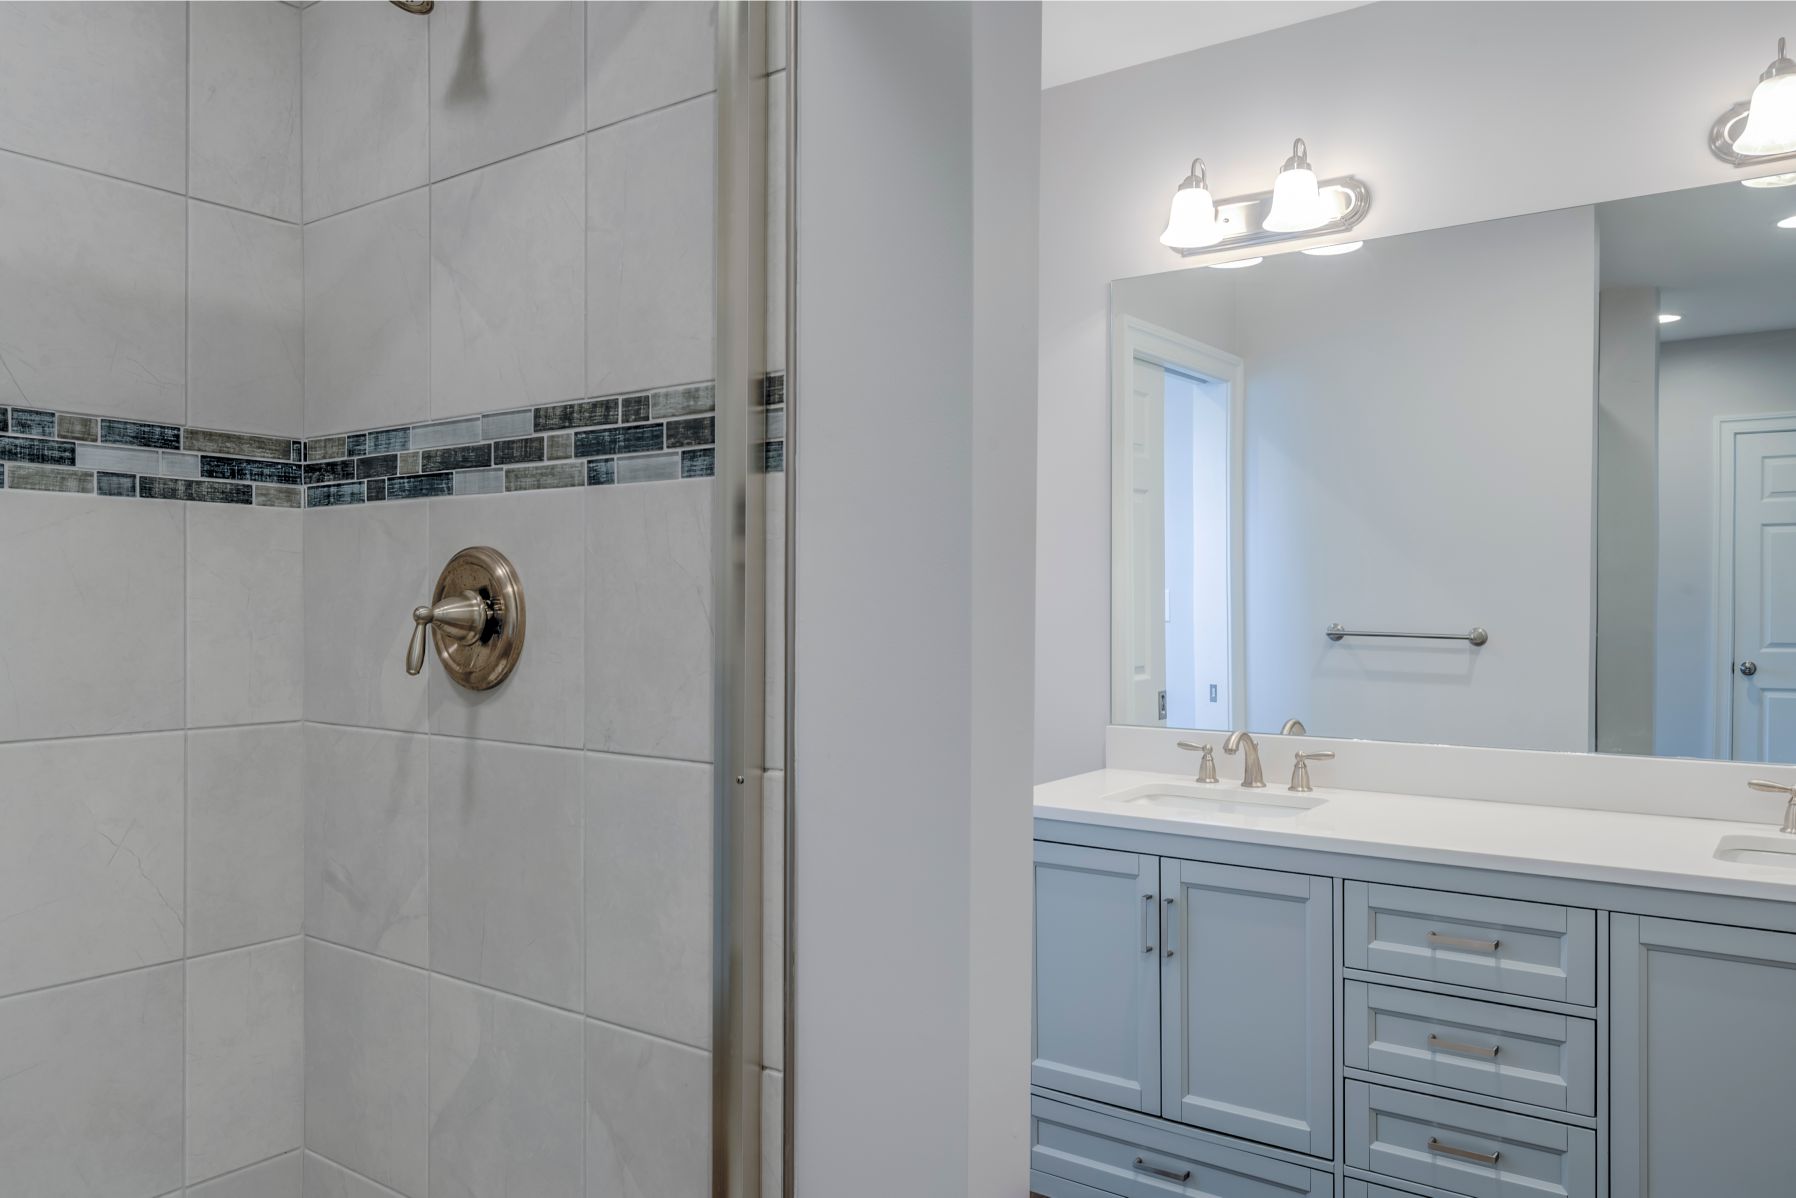 New Addition in October Glory, Ocean View DE - Bathroom with Bevalo 12x12 Dove Tiles and Blue Denim Mosaic Accent Tiles